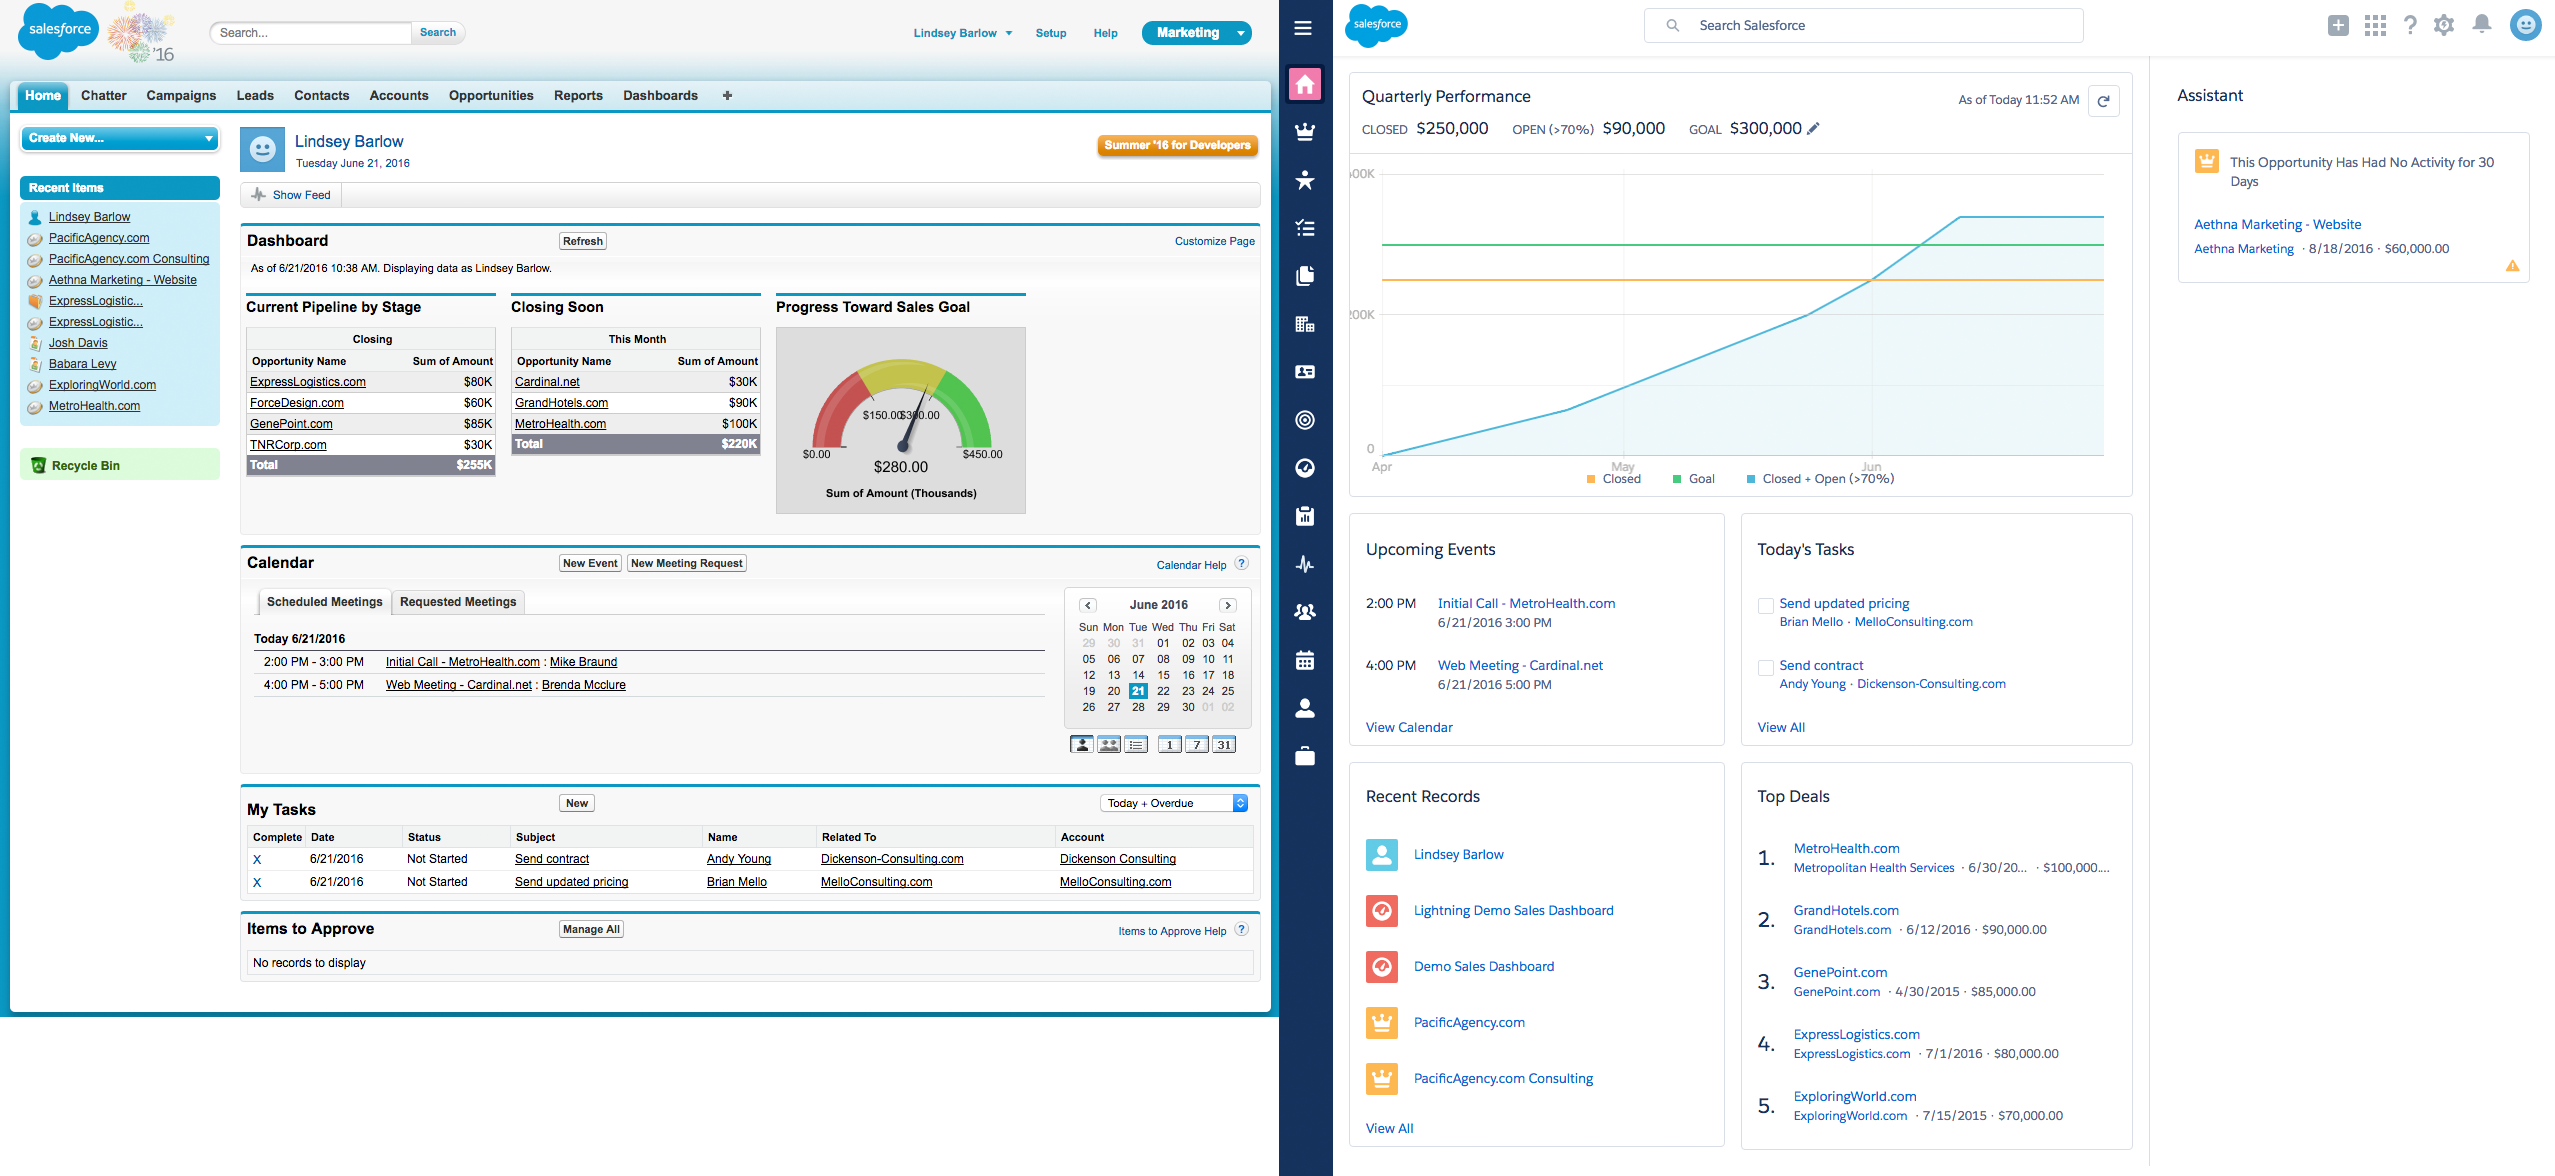 What you need to know about the Salesforce Lightning Interface